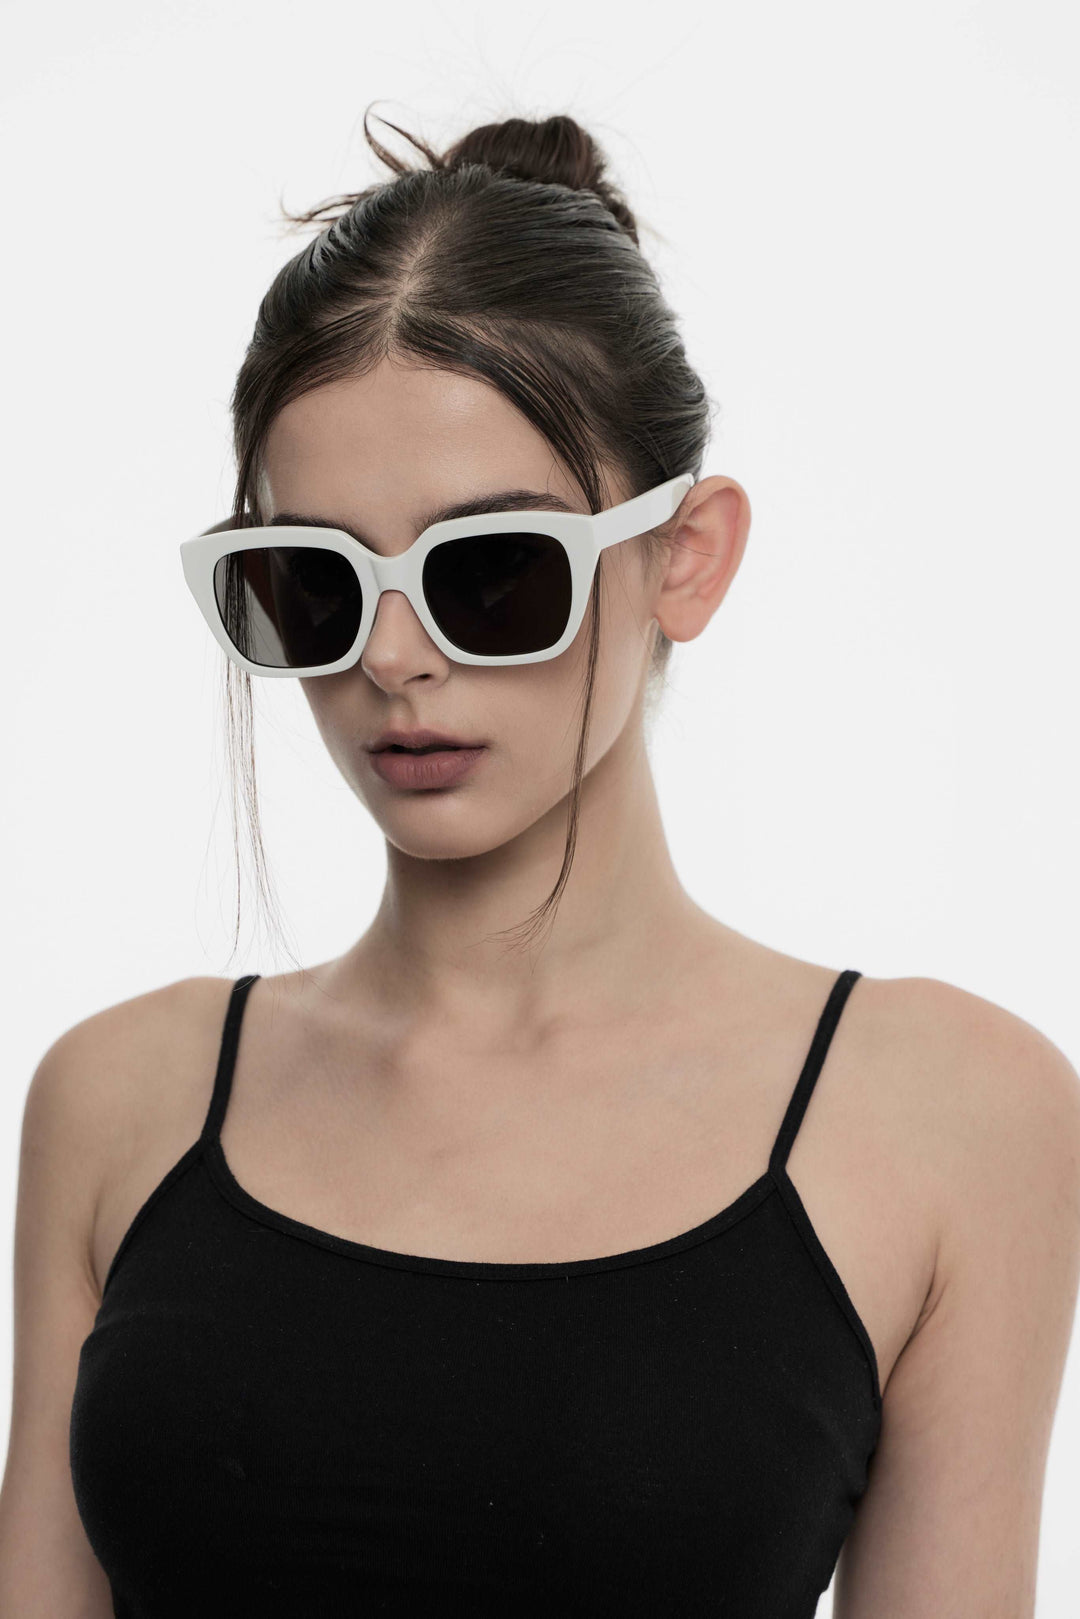 Model wearing Muse in pink square Designer Sunglasses with UV protection from Mercury Retrograde Daydream Collection 